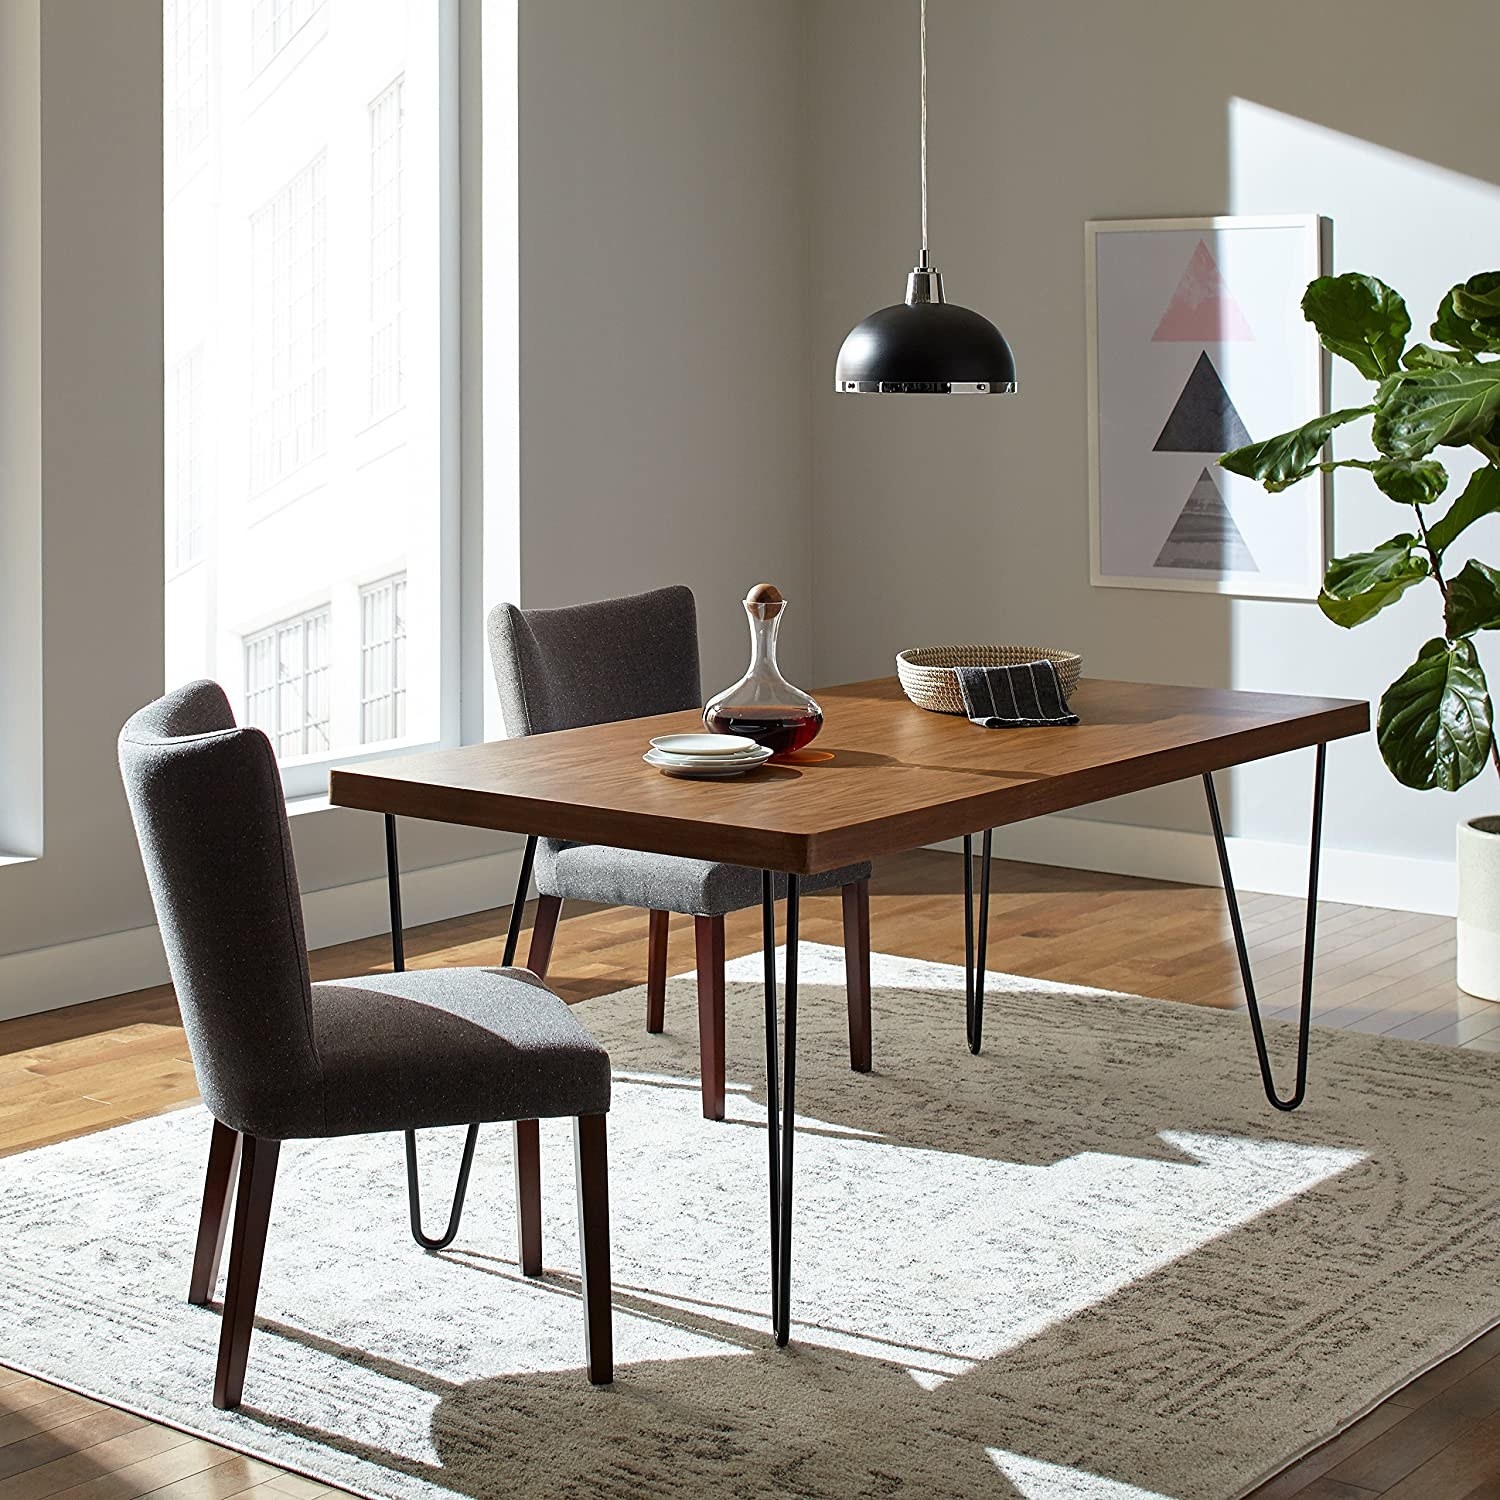 Wooden dining table with two gray chairs